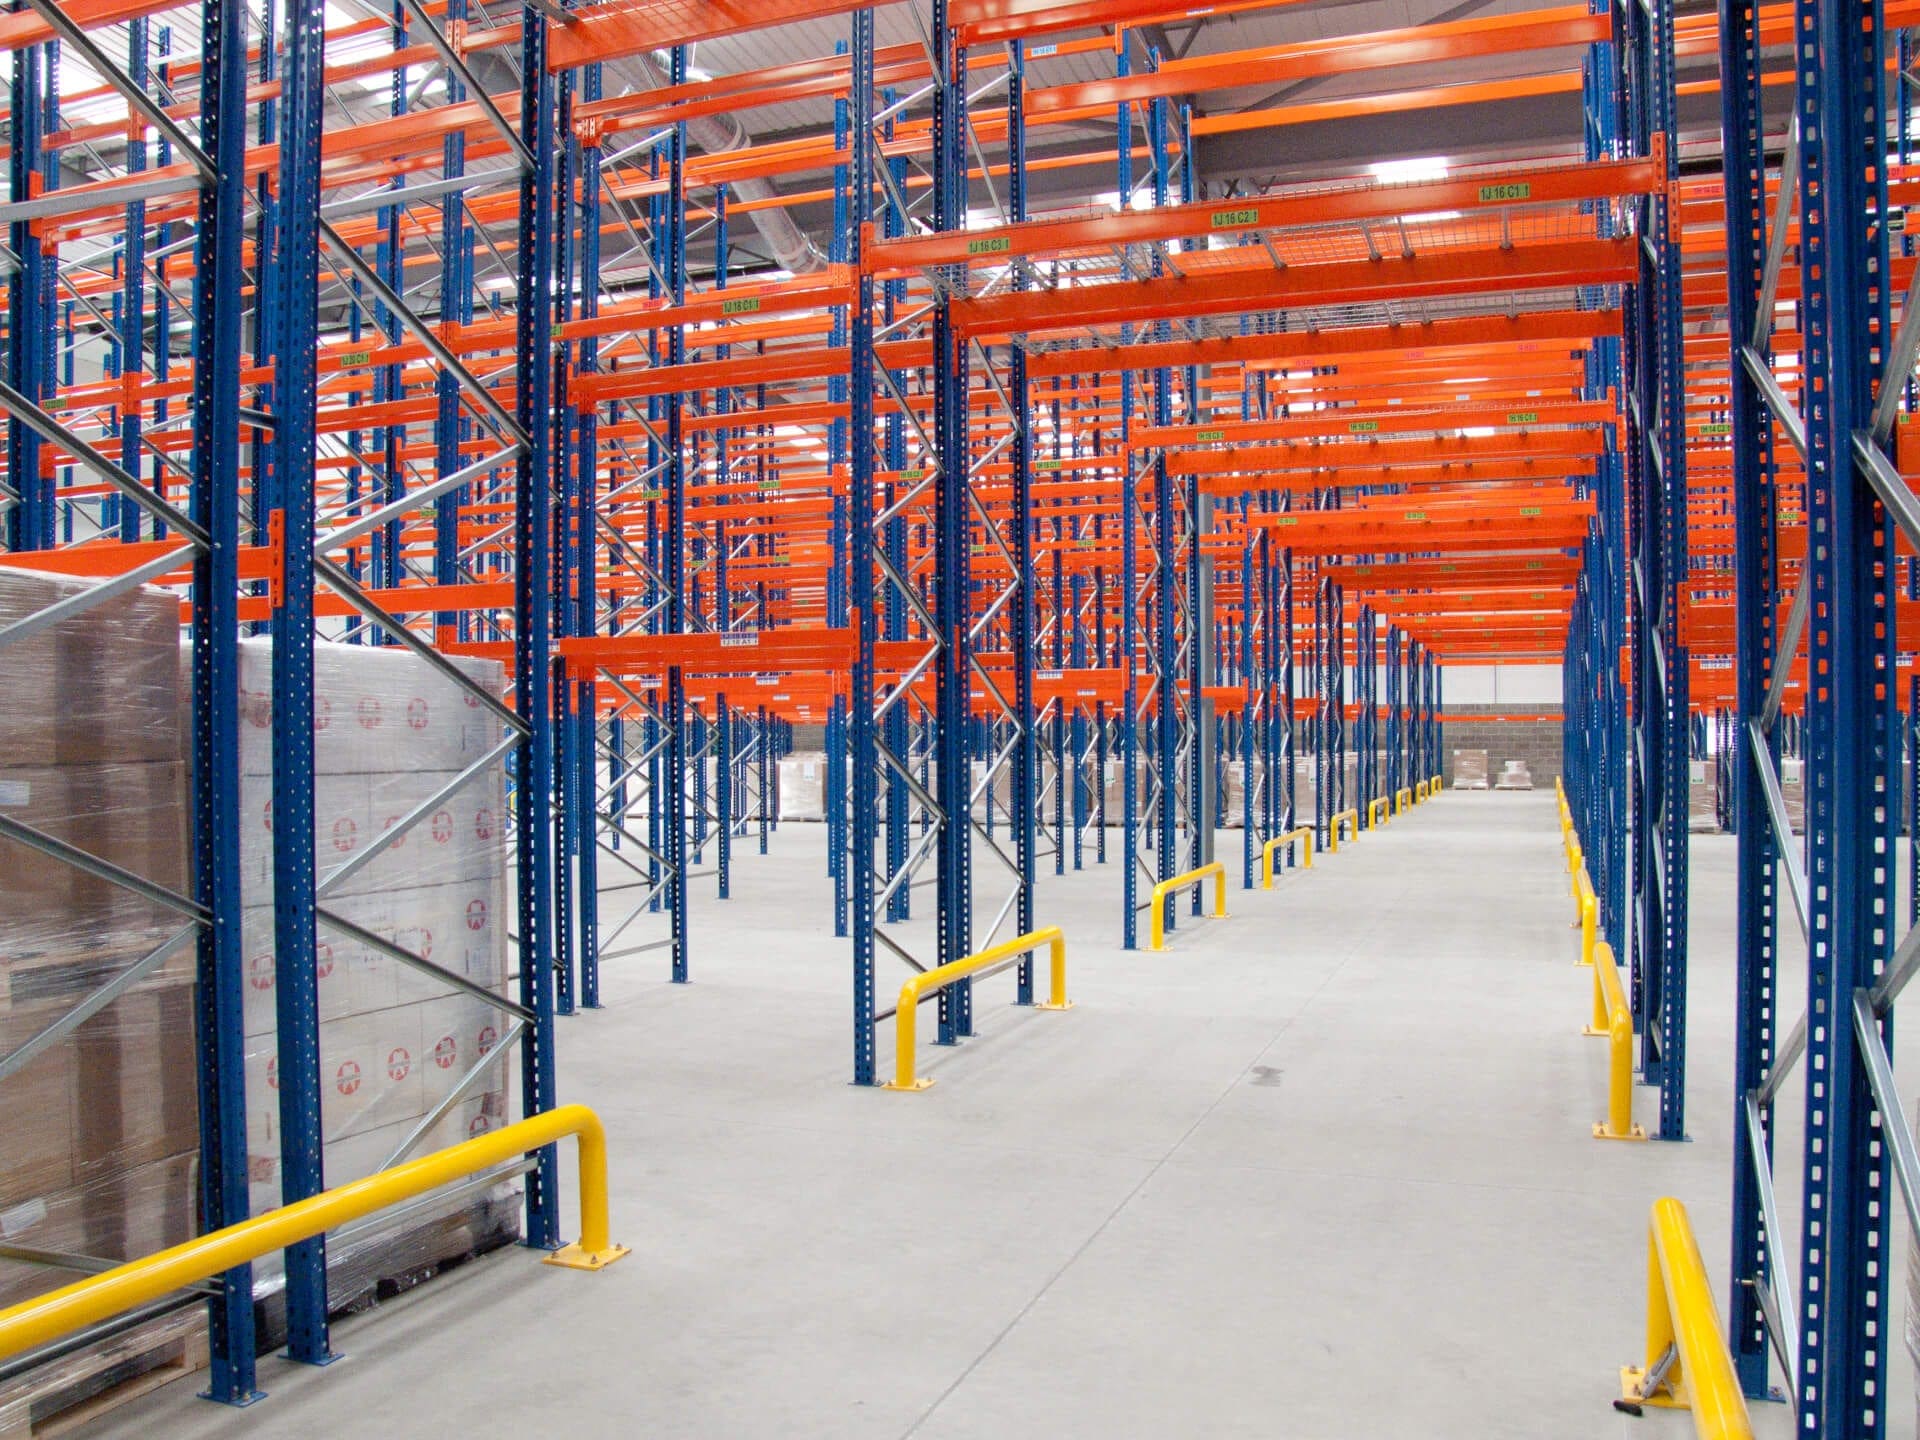 Used Pallet Racking in Scotland, PSS Pallet Racking, PSS Pallet Racking UK, PSS Pallet Racking North, PSS Pallet Racking North West, PSS Pallet Racking North East, PSS Pallet Racking County Durham, Warehouse Optimization, Racking Protectors